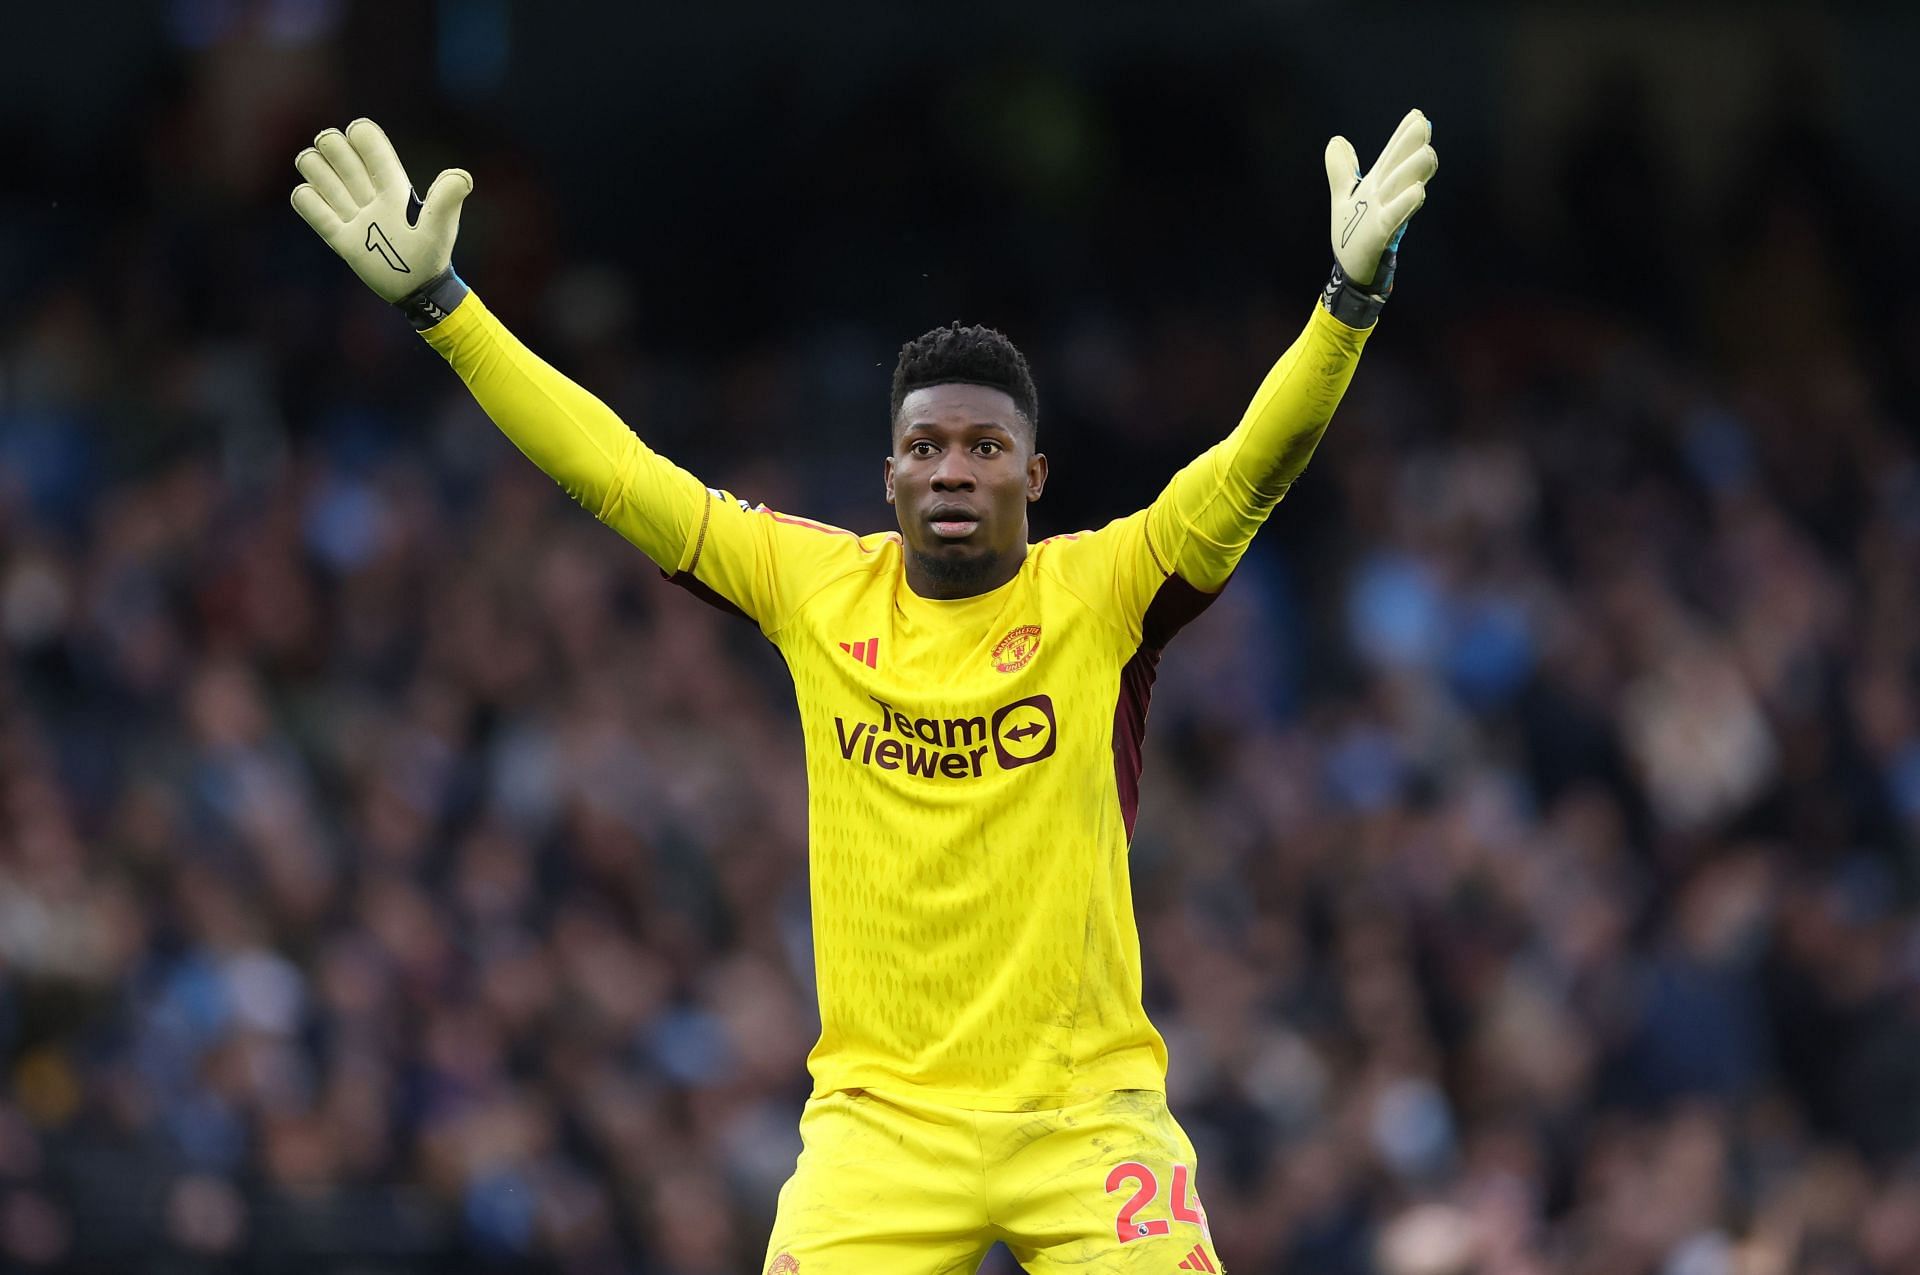 Onana was an assured presence in goal for United.